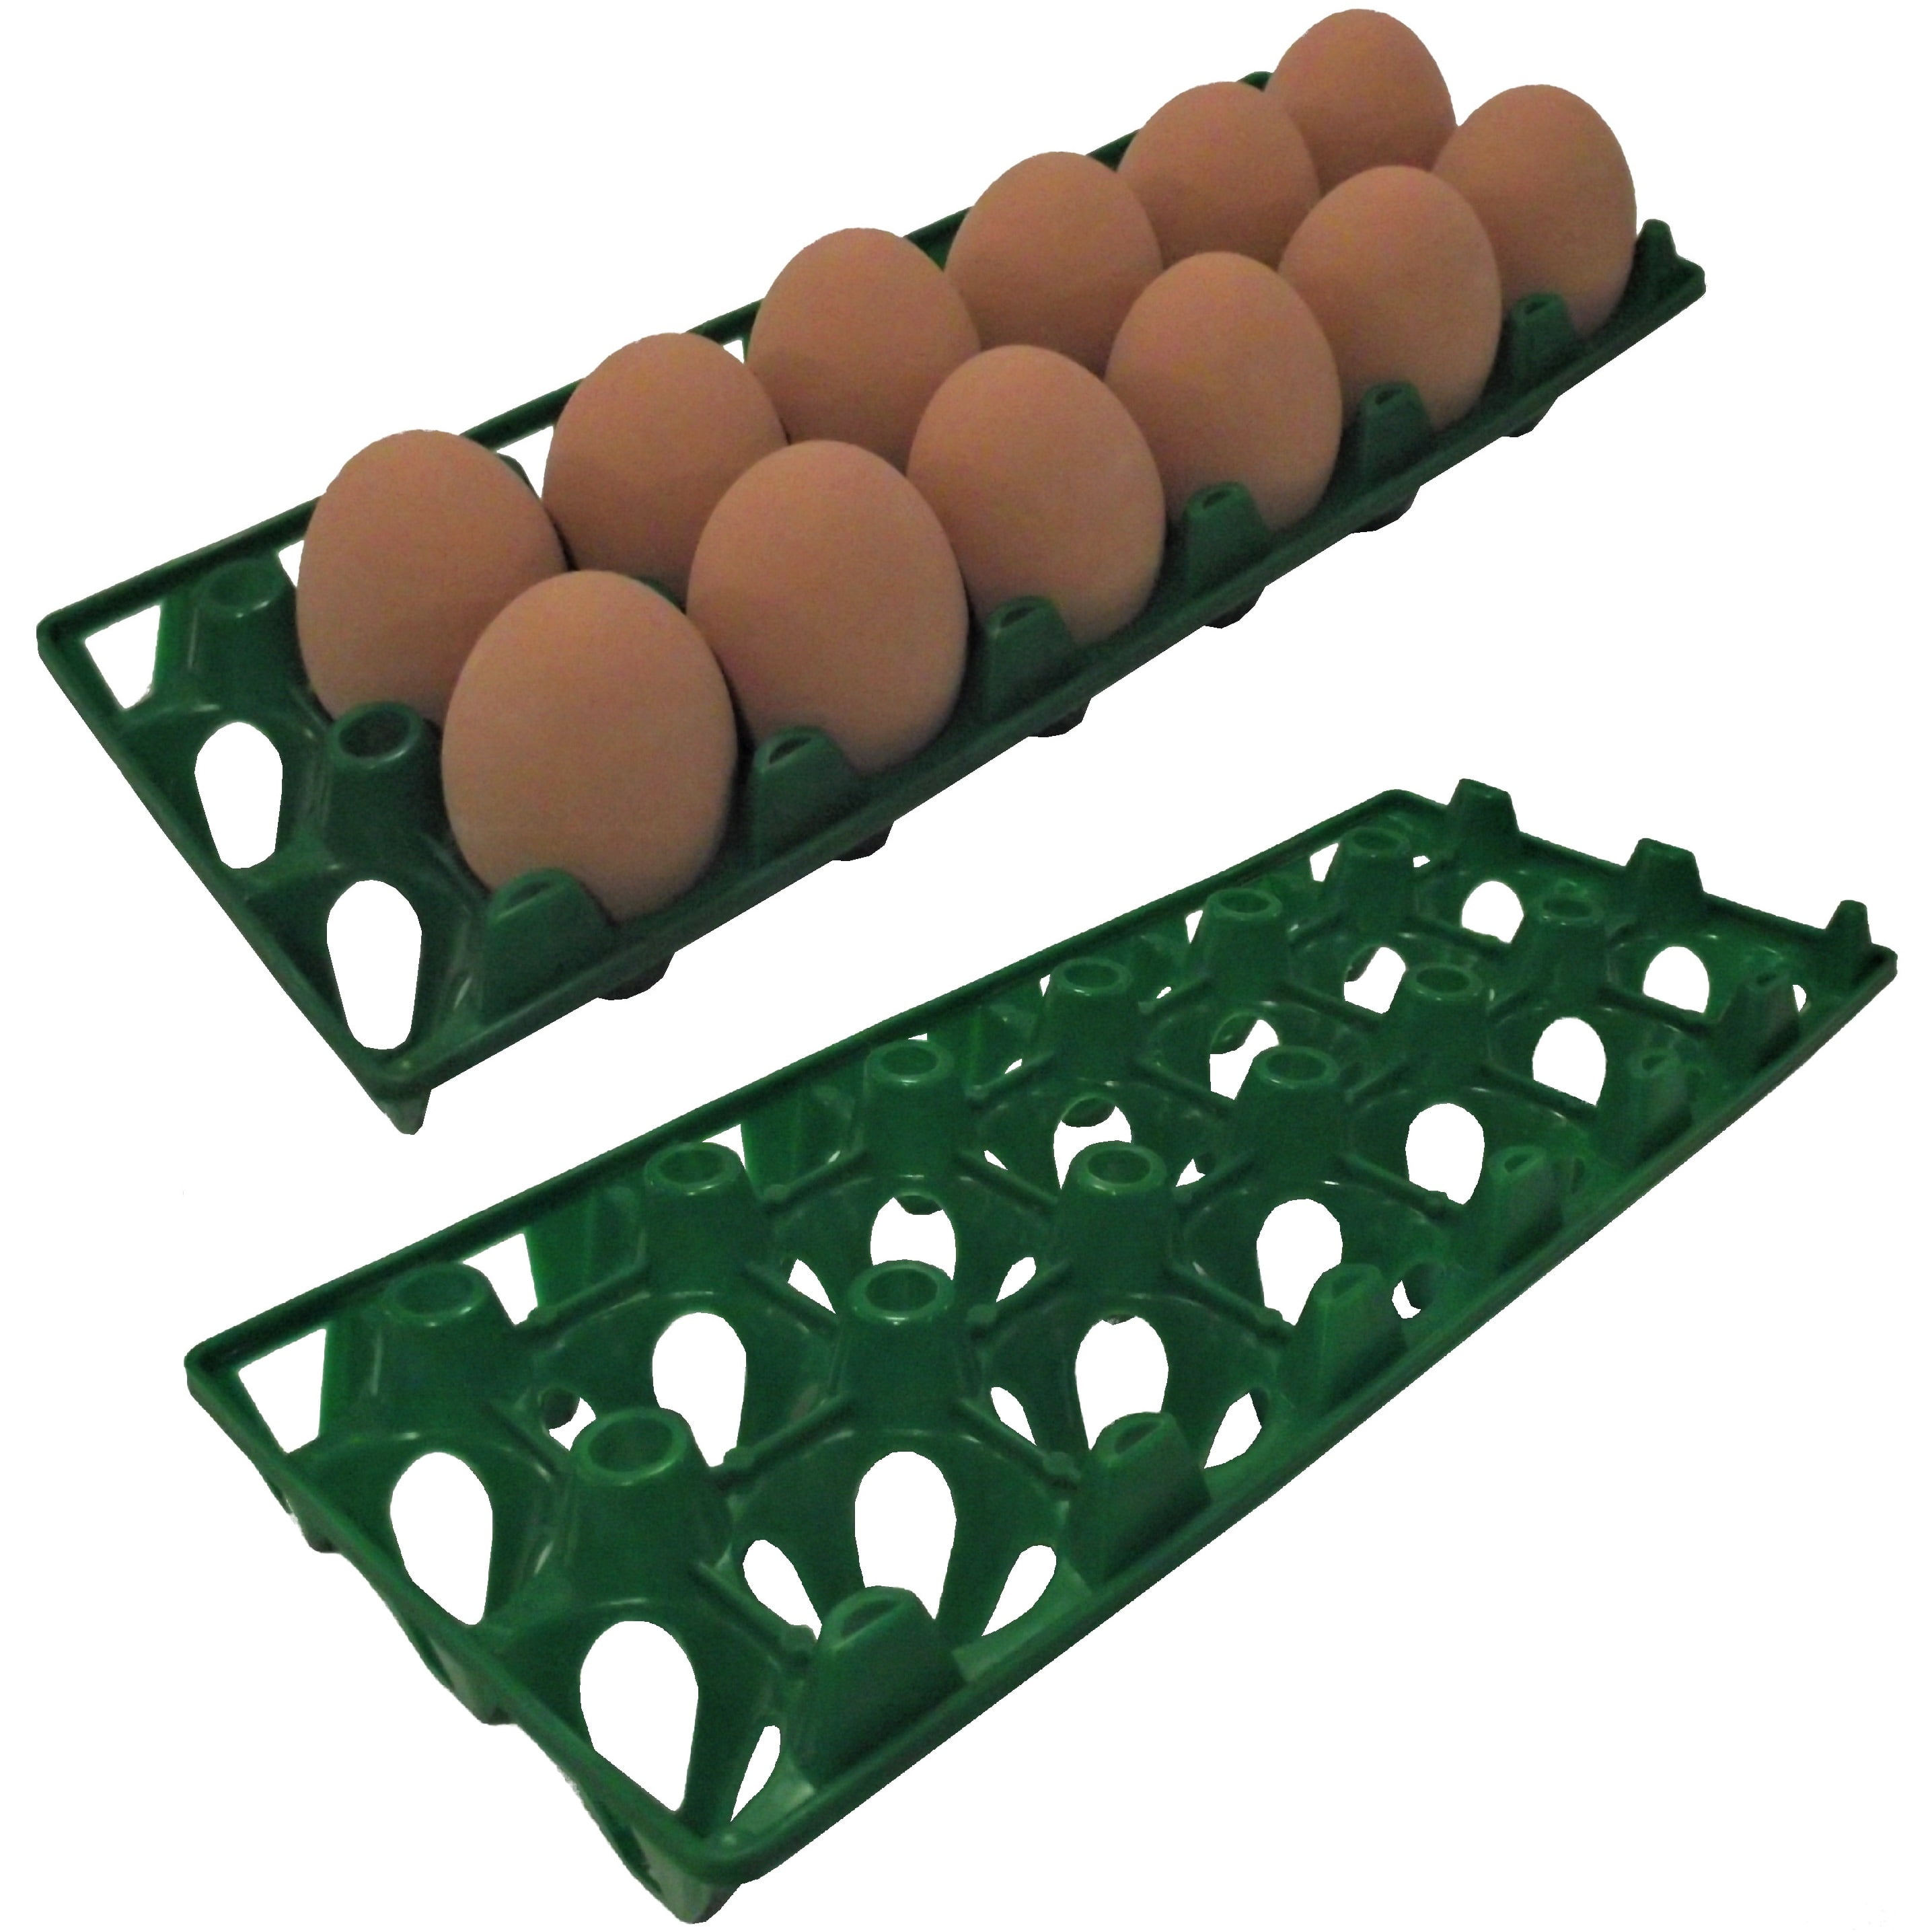 6 Pk Egg Trays Fit Incubator Storage Holds 30 Poultry Eggs Industry Tool 